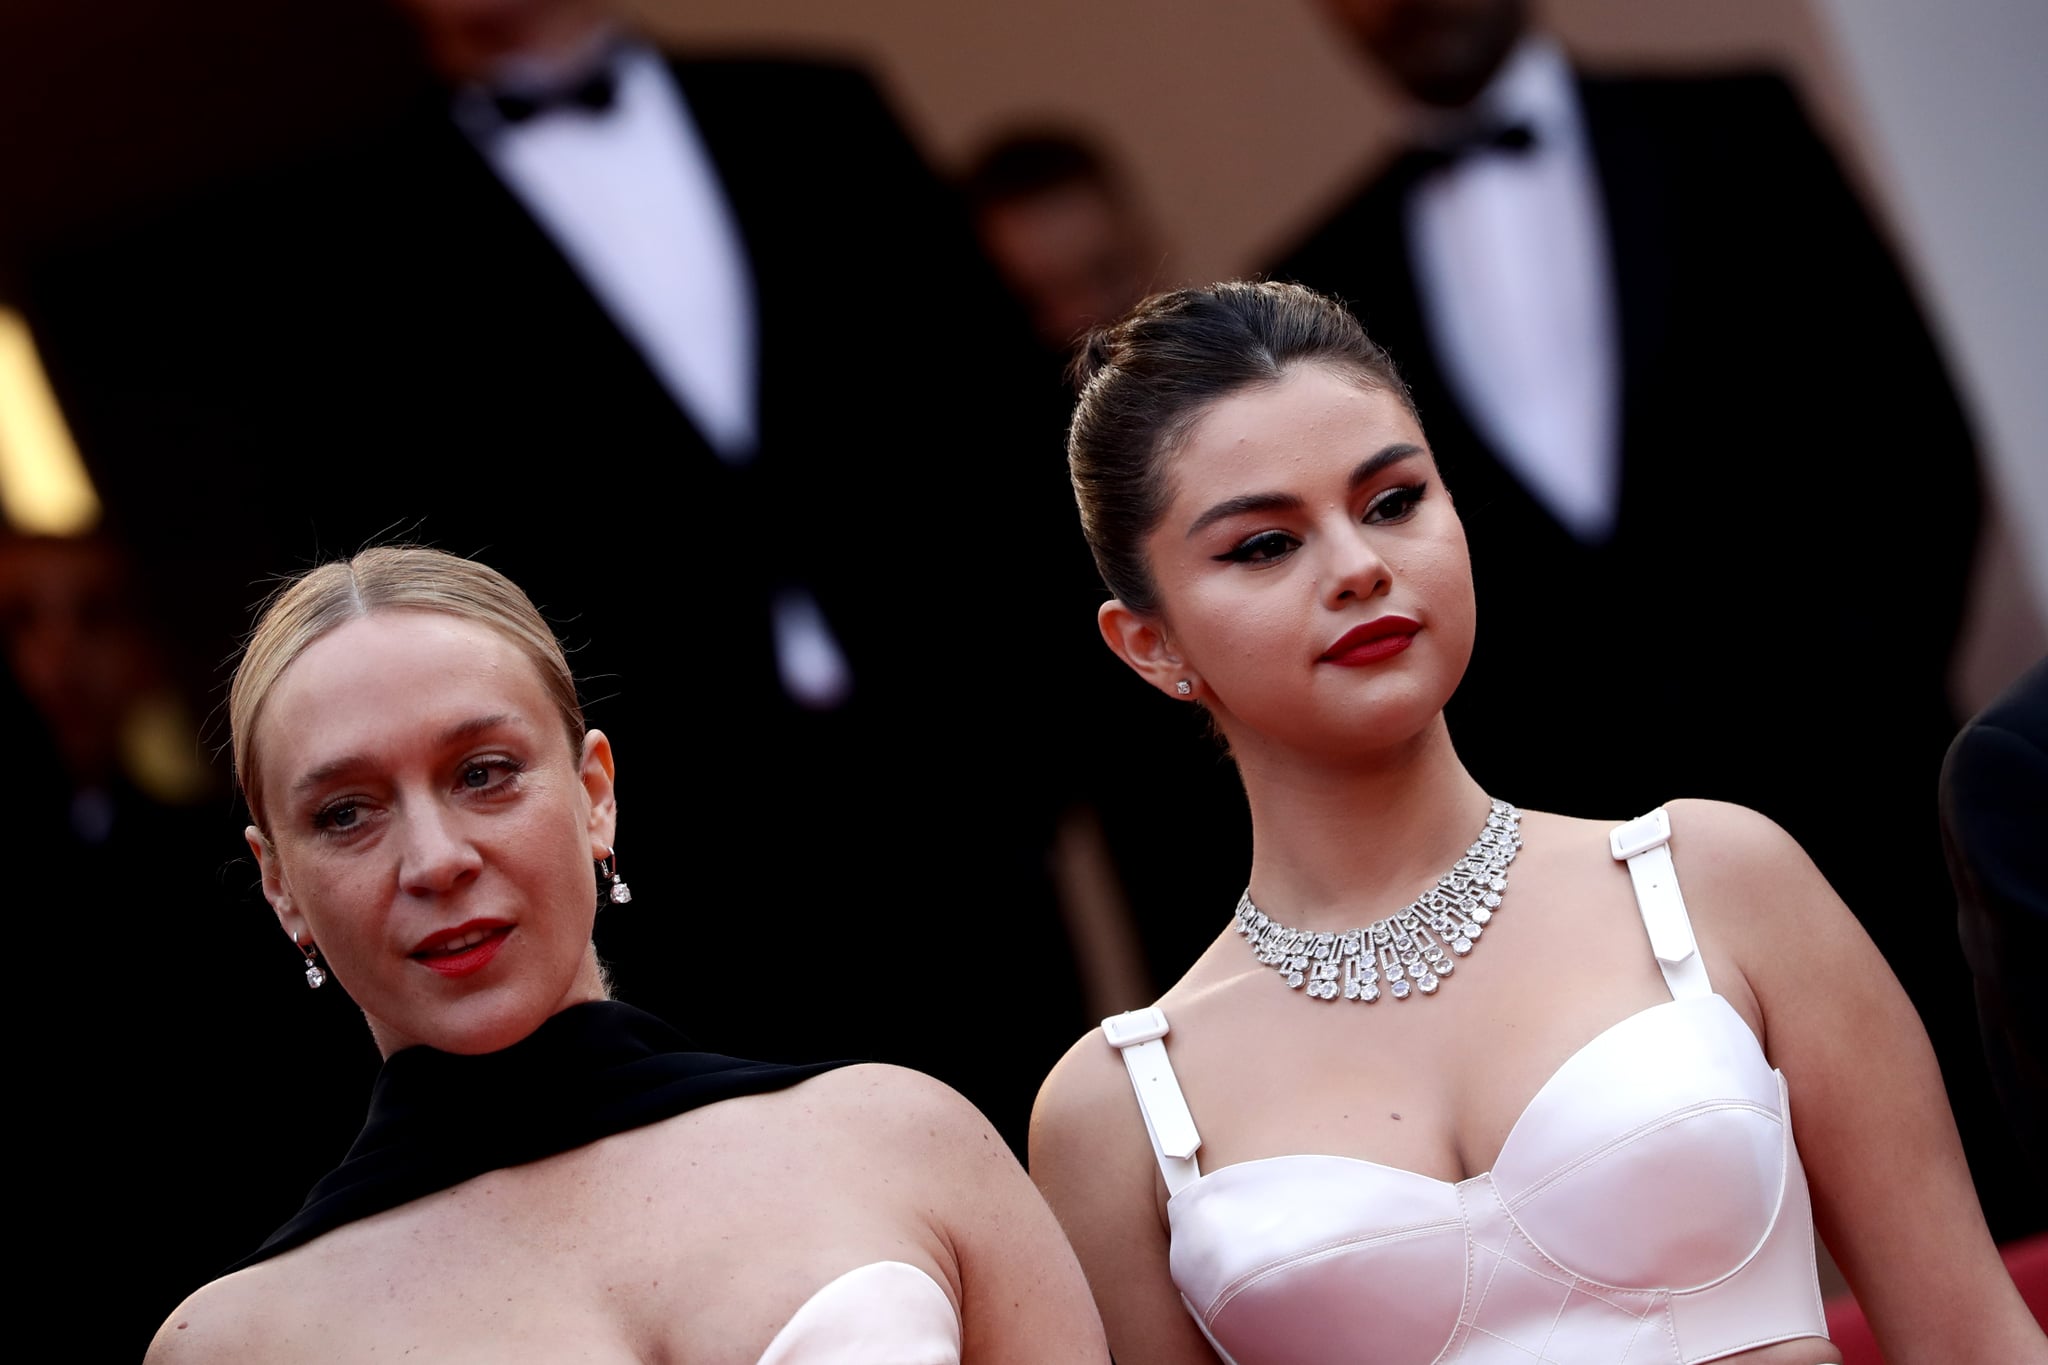 Selena Gomez Wears Louis Vuitton Silk Bra Top and Skirt at Cannes